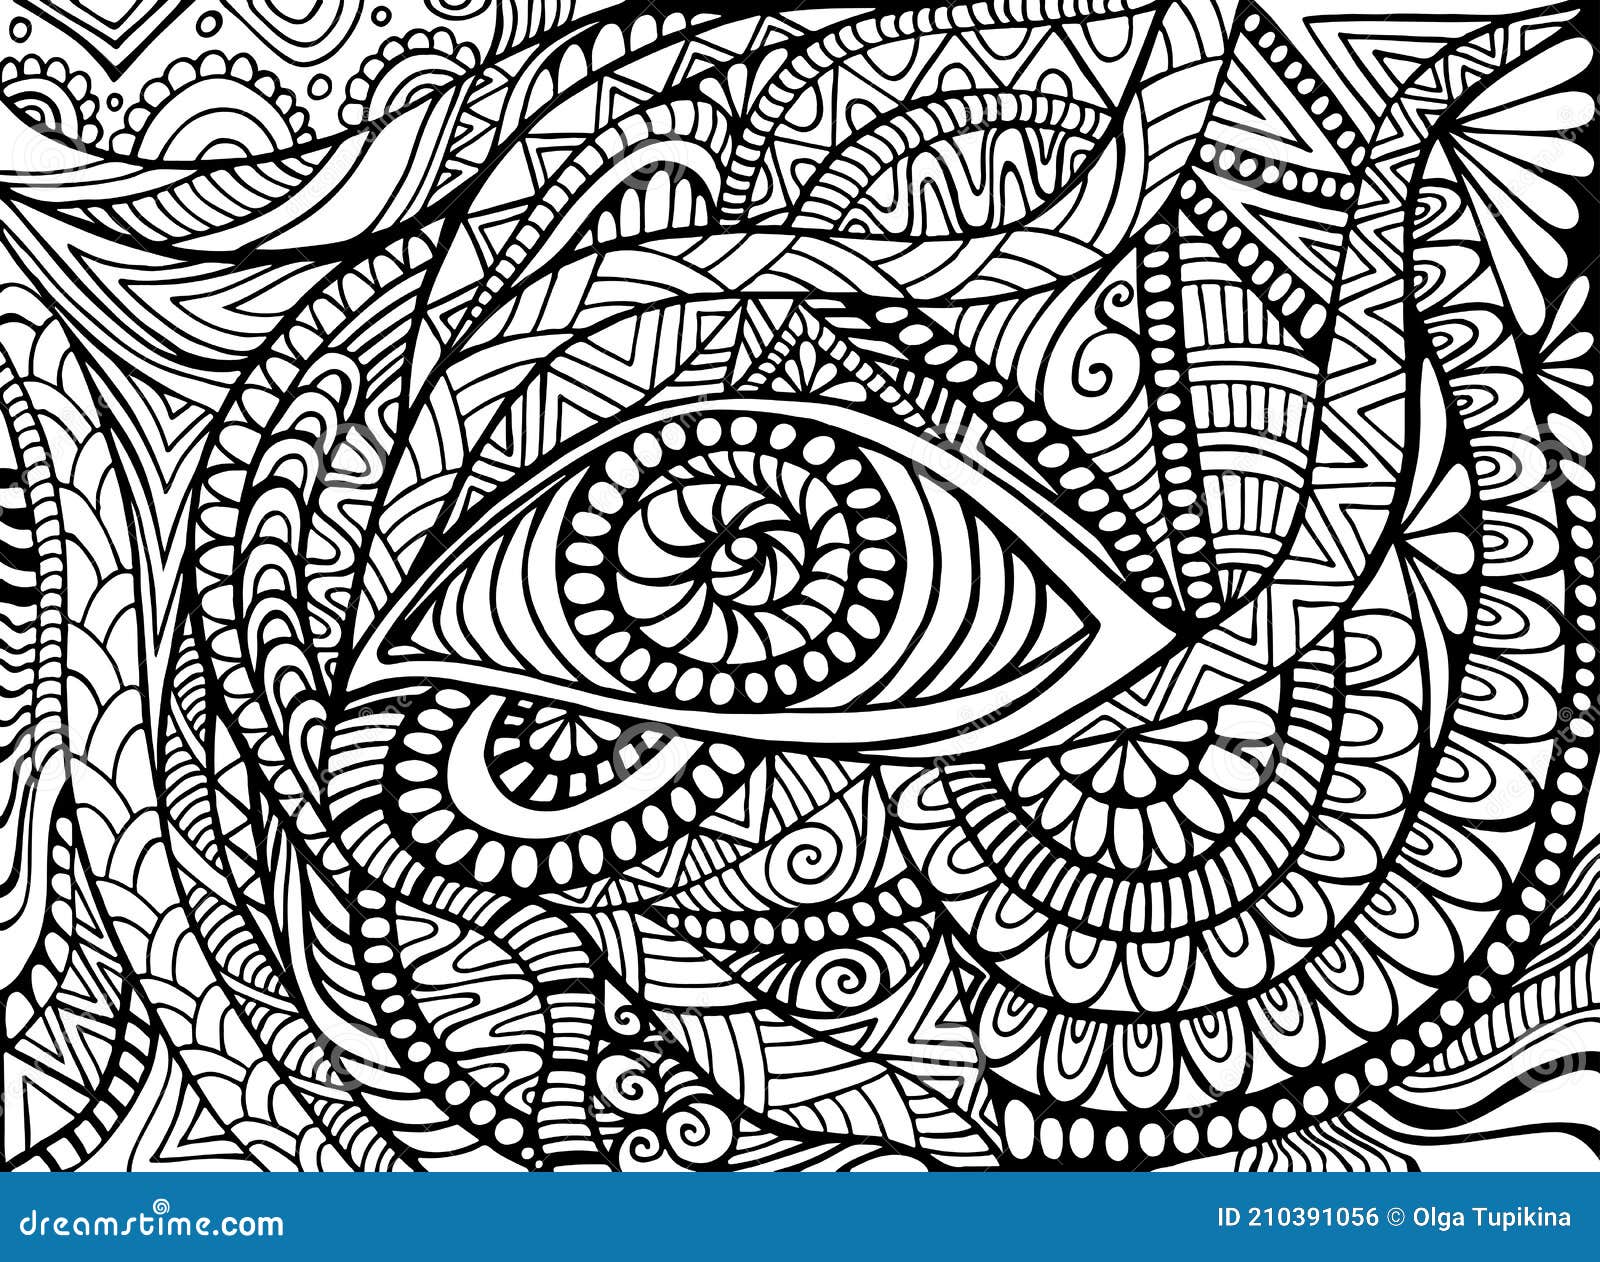 adult coloring trippy stock illustrations 91 adult coloring trippy stock illustrations vectors clipart dreamstime